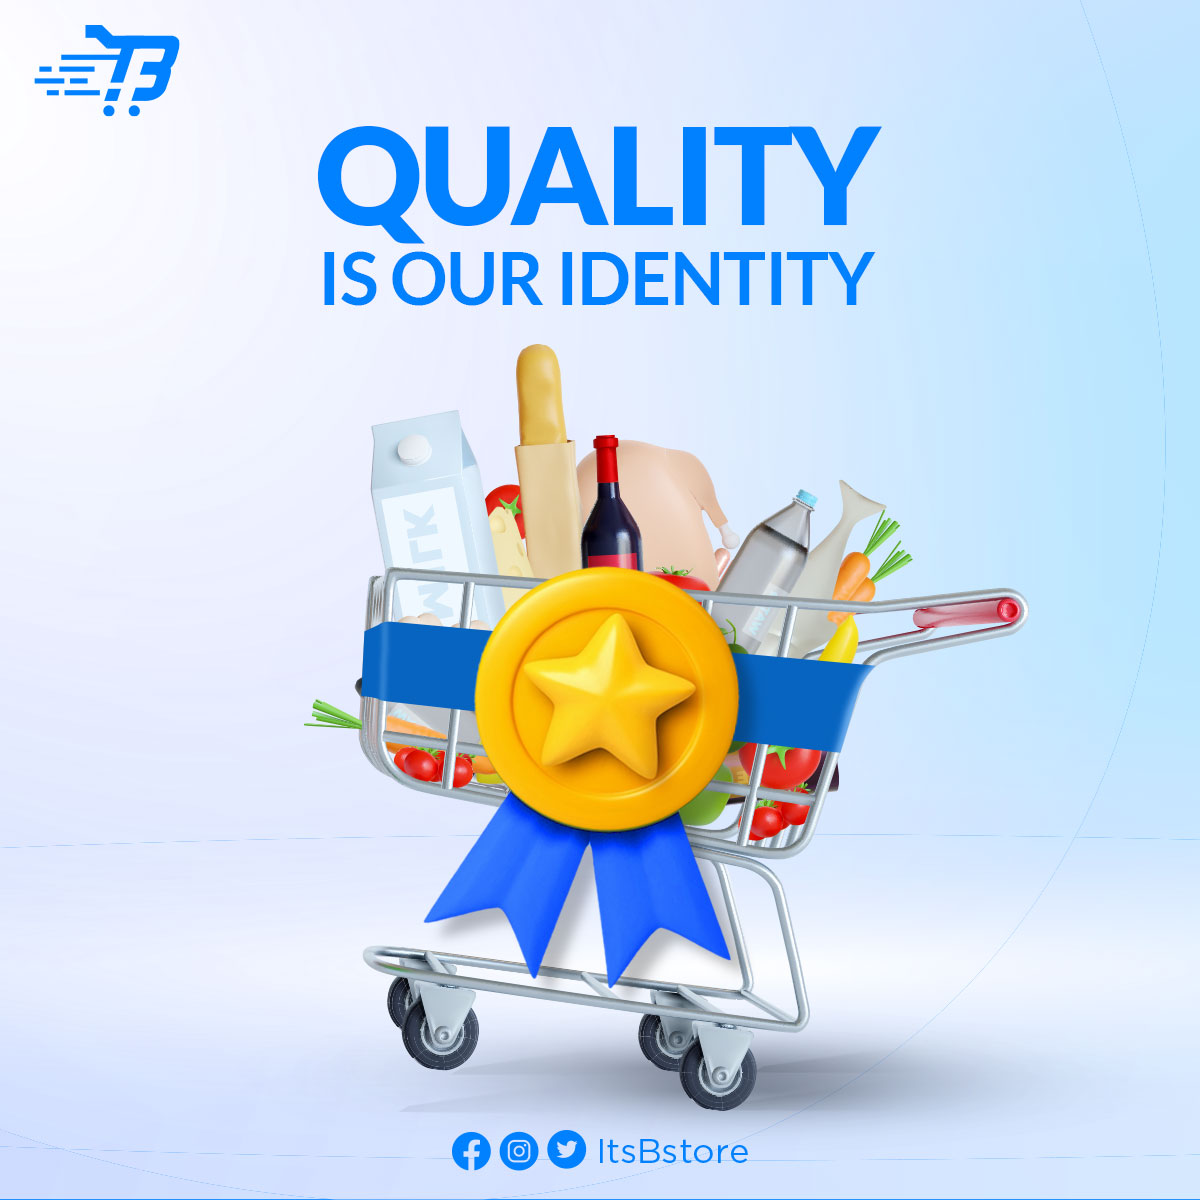 Among our multitudes of unique features, 'Quality' matters to us a lot. B-Store focuses on the longevity of products and therefore sells highquality products for you

#Bstore #Bfamily #onlineshopping #onlinesellers #sell #onlinesale #ecommerce #sellyourproducts #innovationfactory